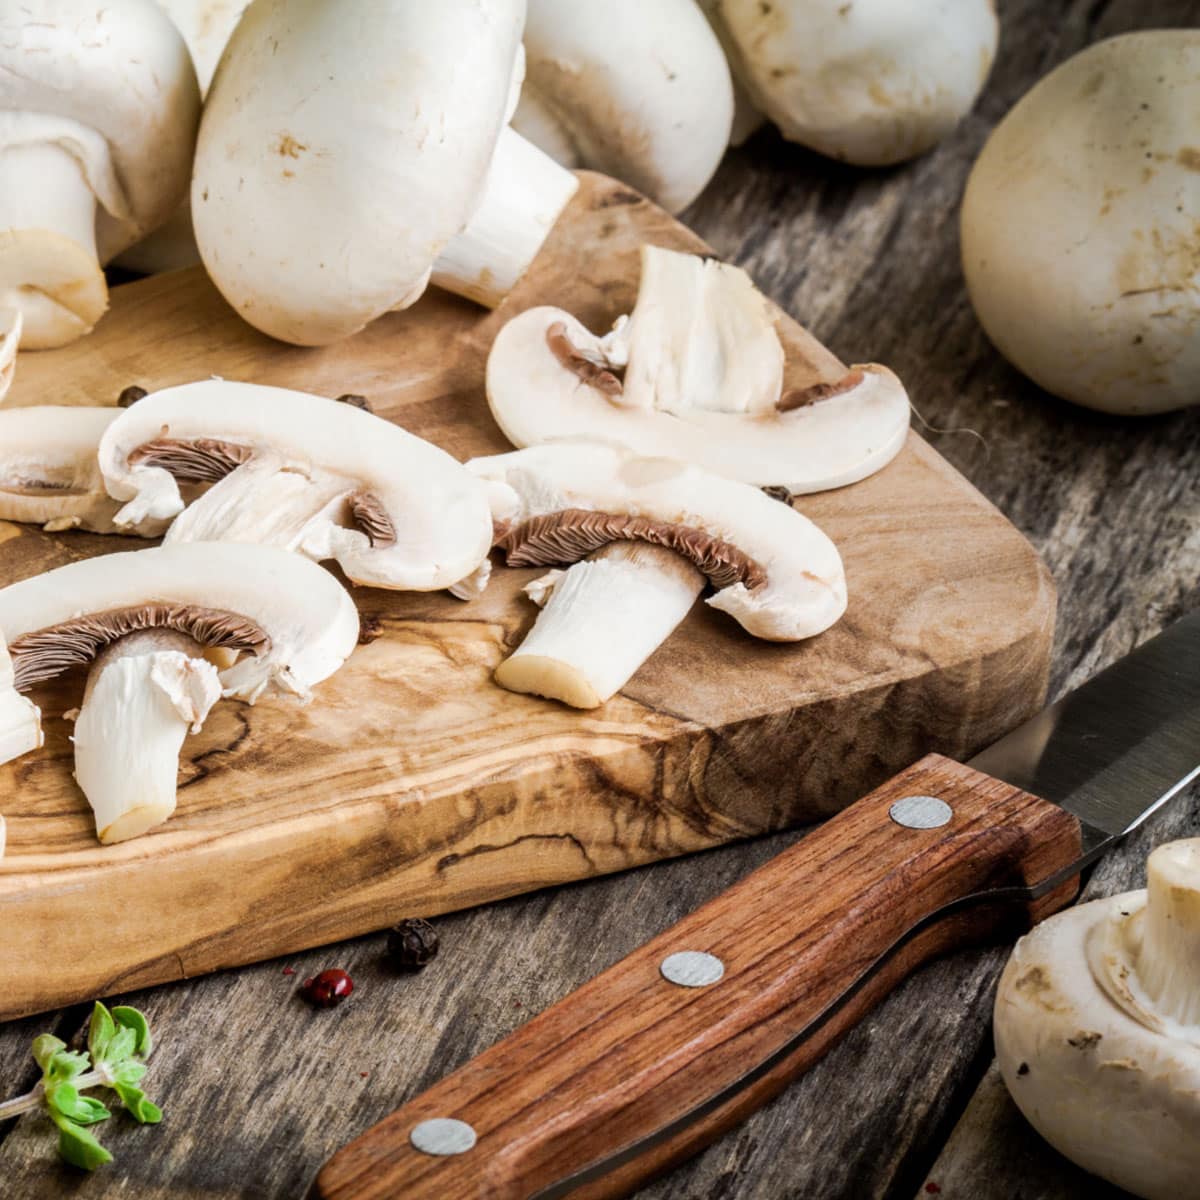 When storing mushrooms, you can keep them in a cool, dark place. Paper bags or a Tupperware container with holes punched in the lid for ventilation is the best.